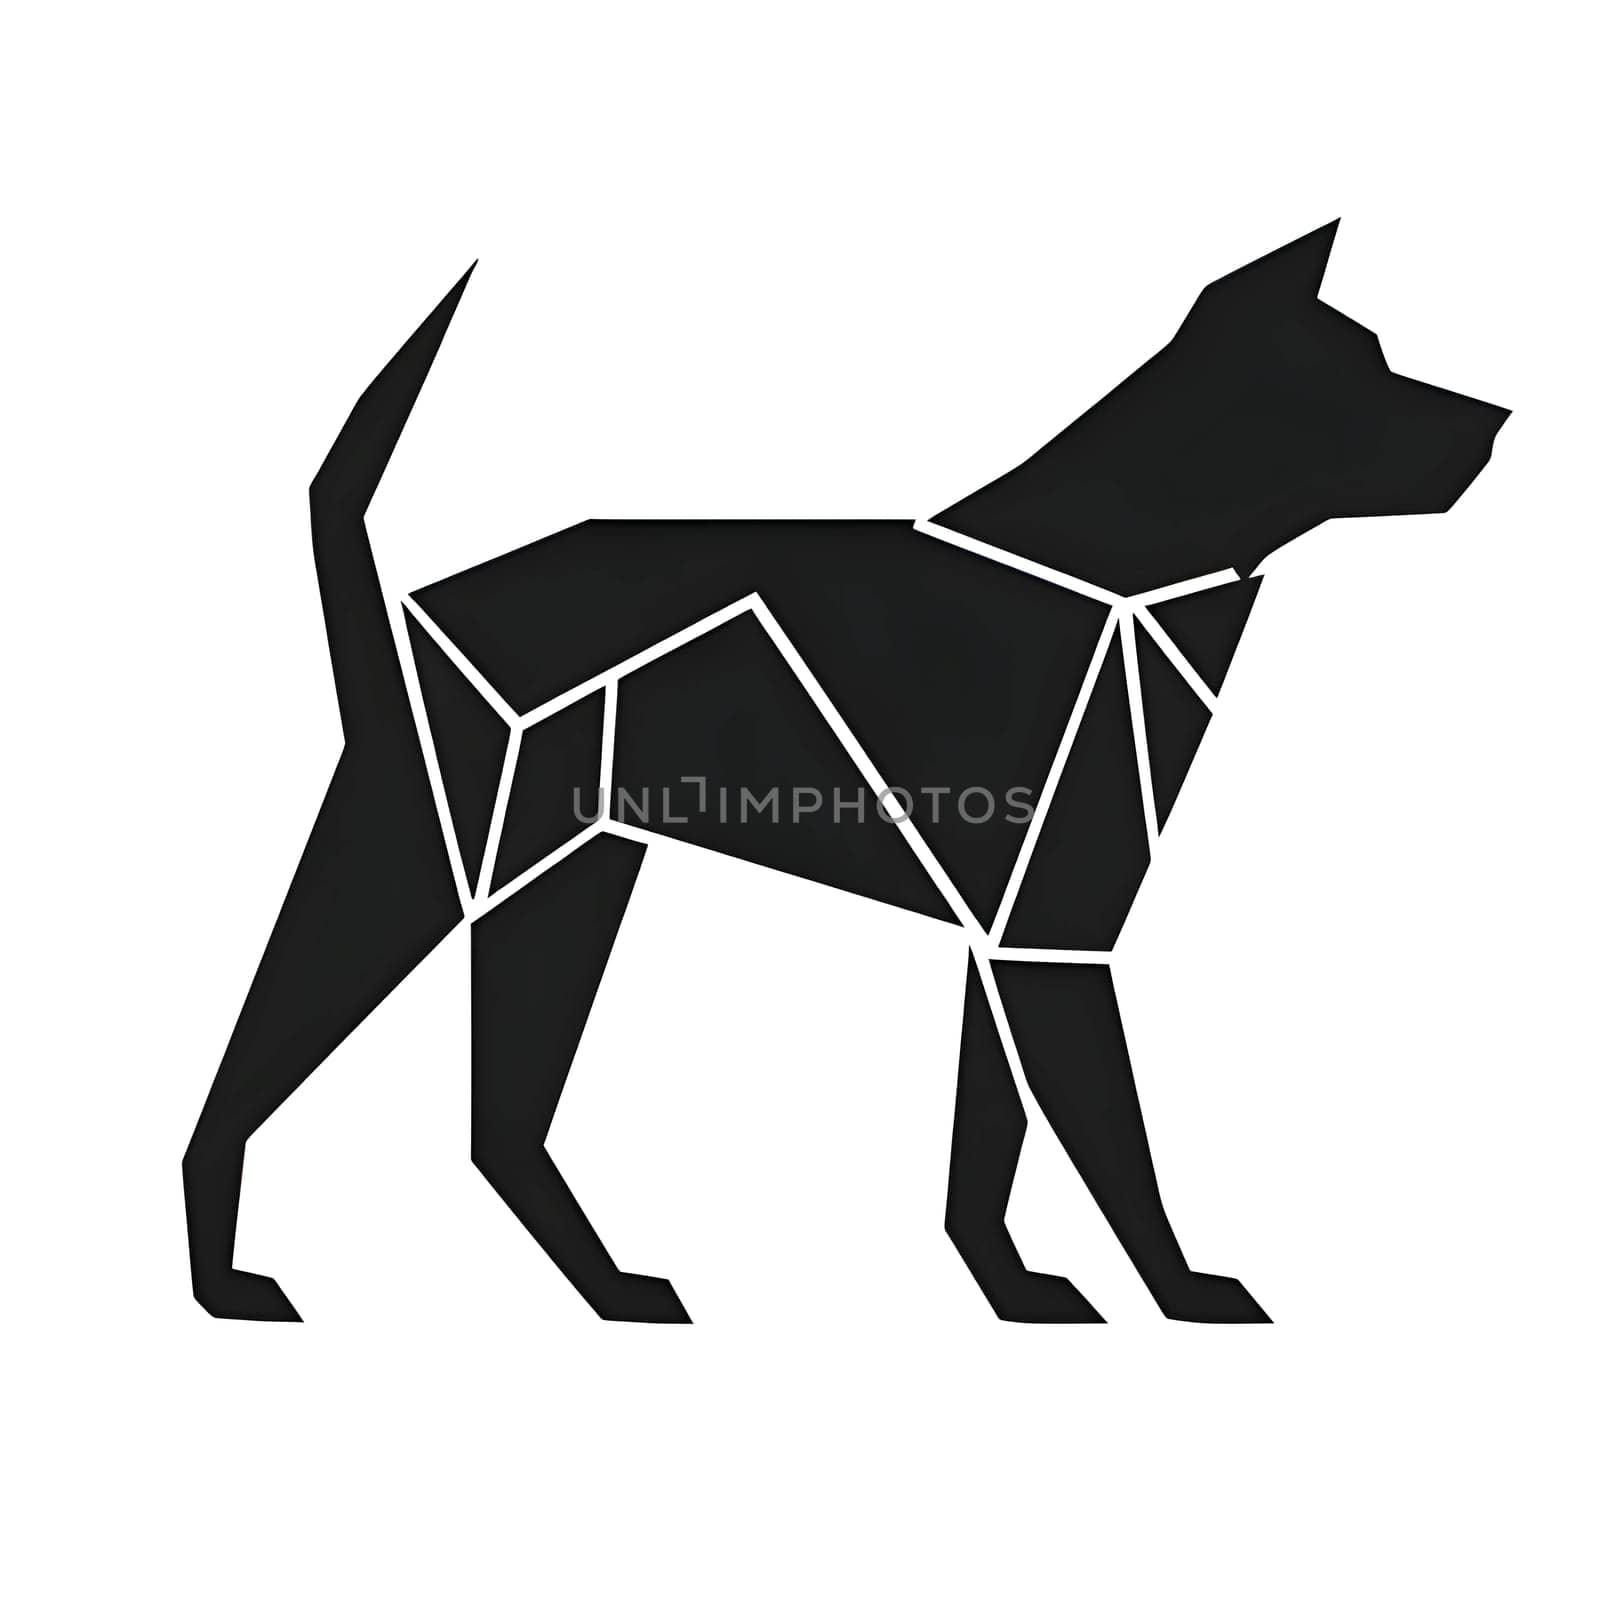 Vector illustration of a dog in black silhouette against a clean white background, capturing graceful forms.